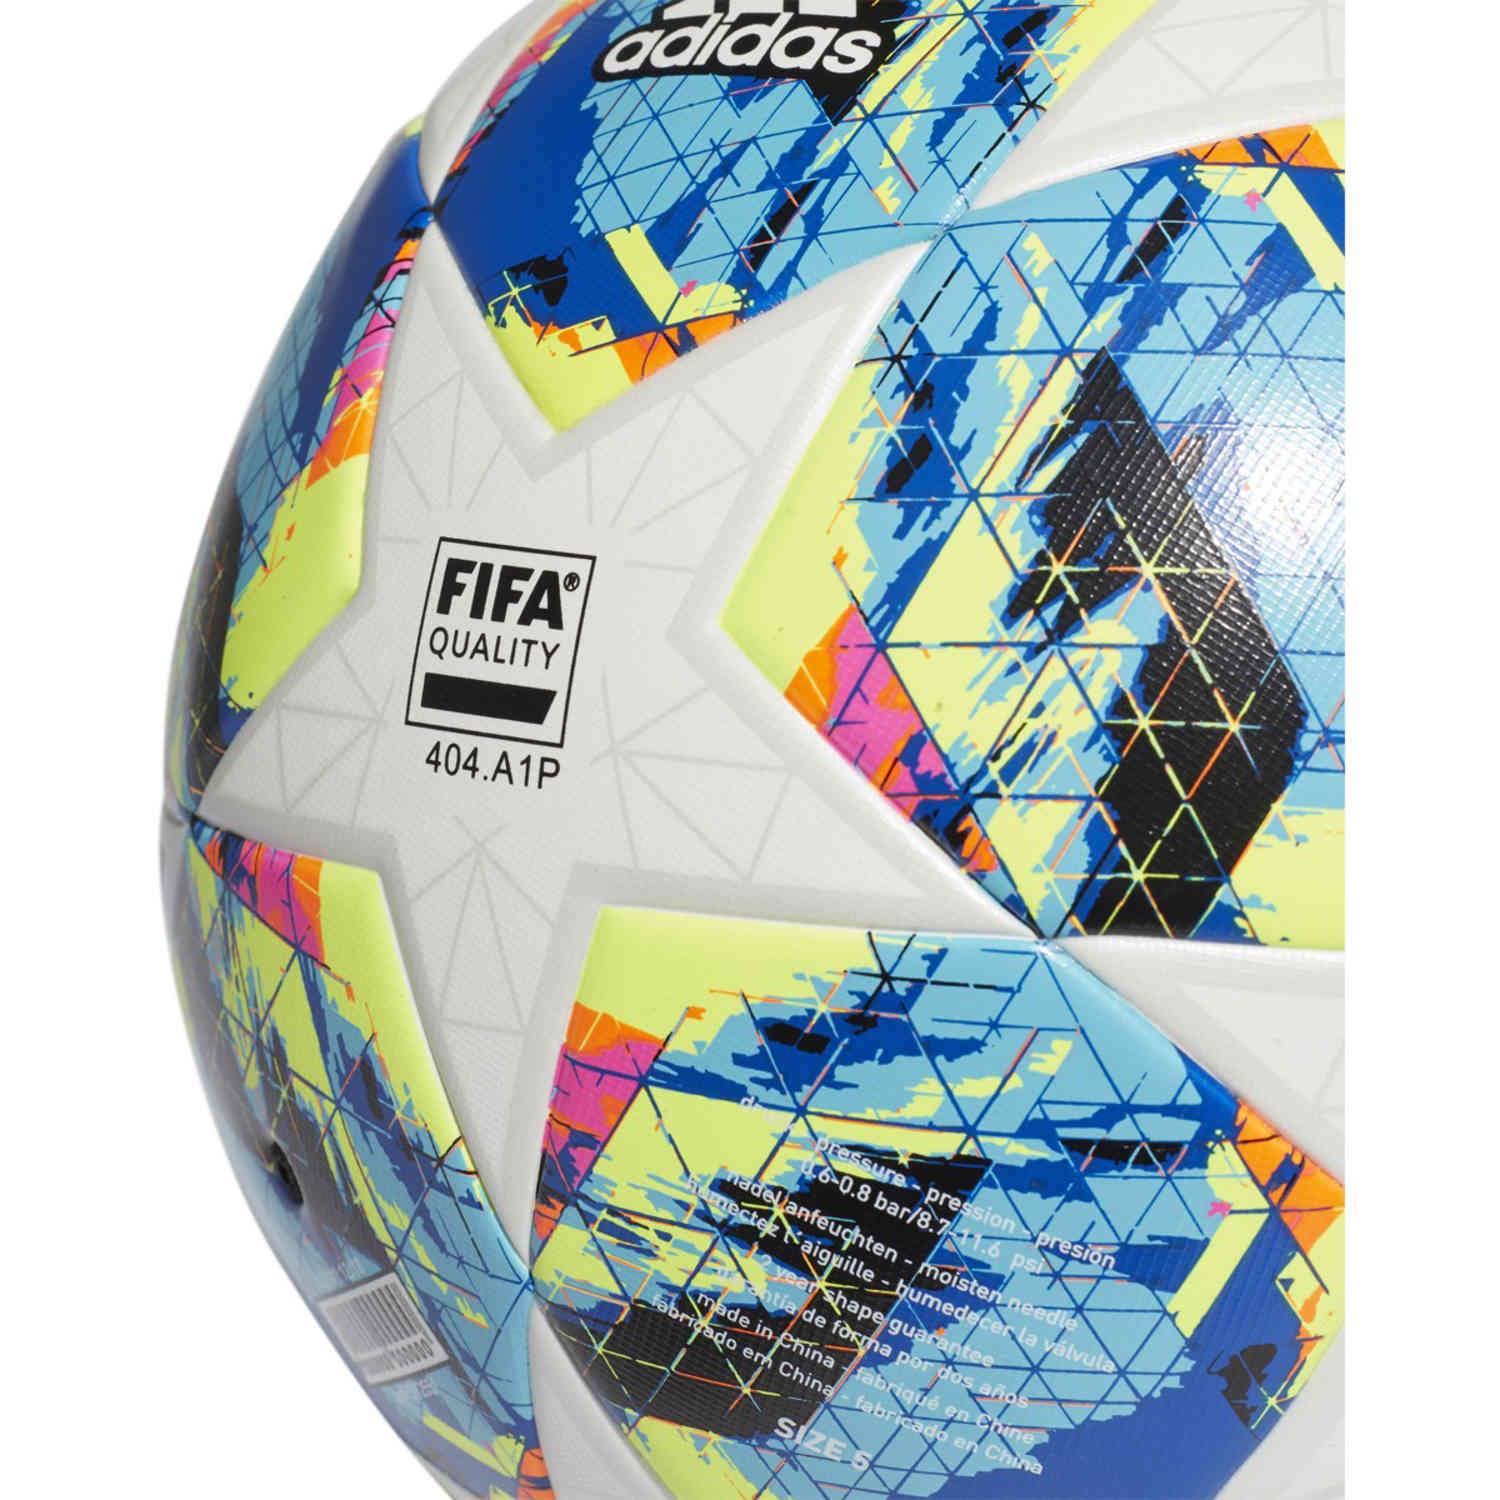 finale top training ball